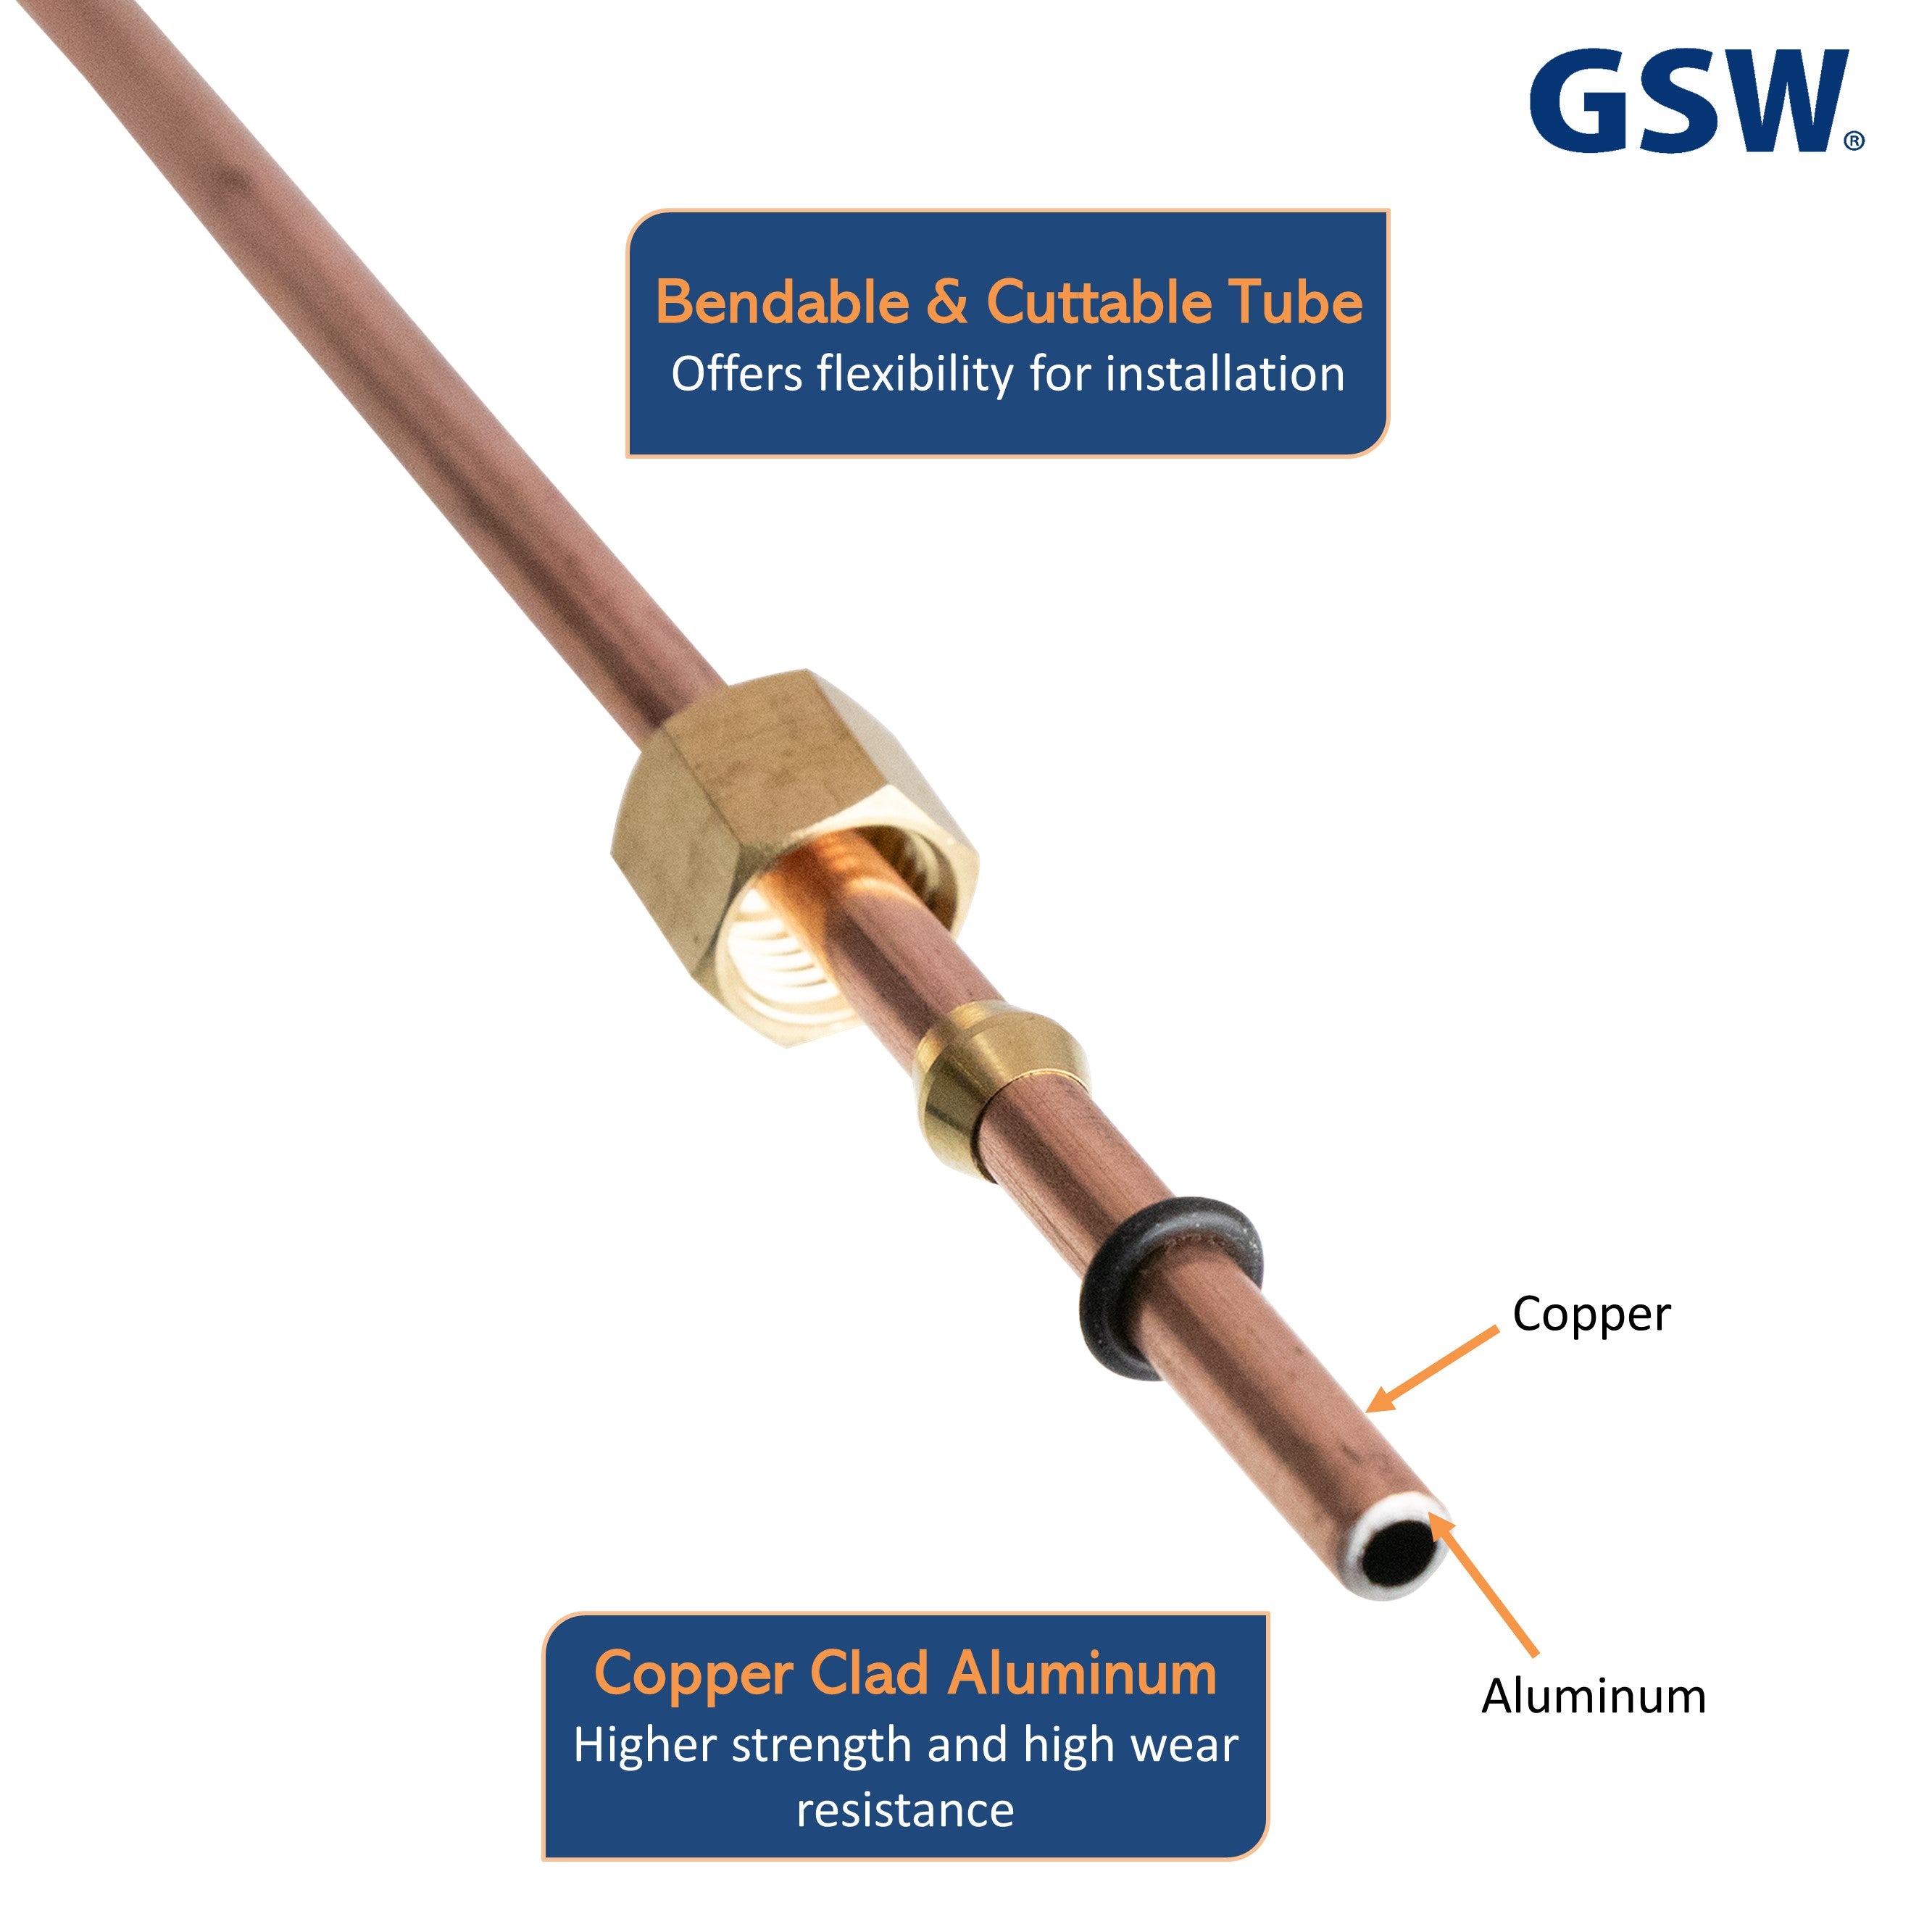 GSW WR-PTC 3/16"OD Bendable Pilot Tubing with Pilot Tip, Nut & Sleeve, Chinese Wok Range Accessory for Commercial Restaurant Kitchen Gas Equipment